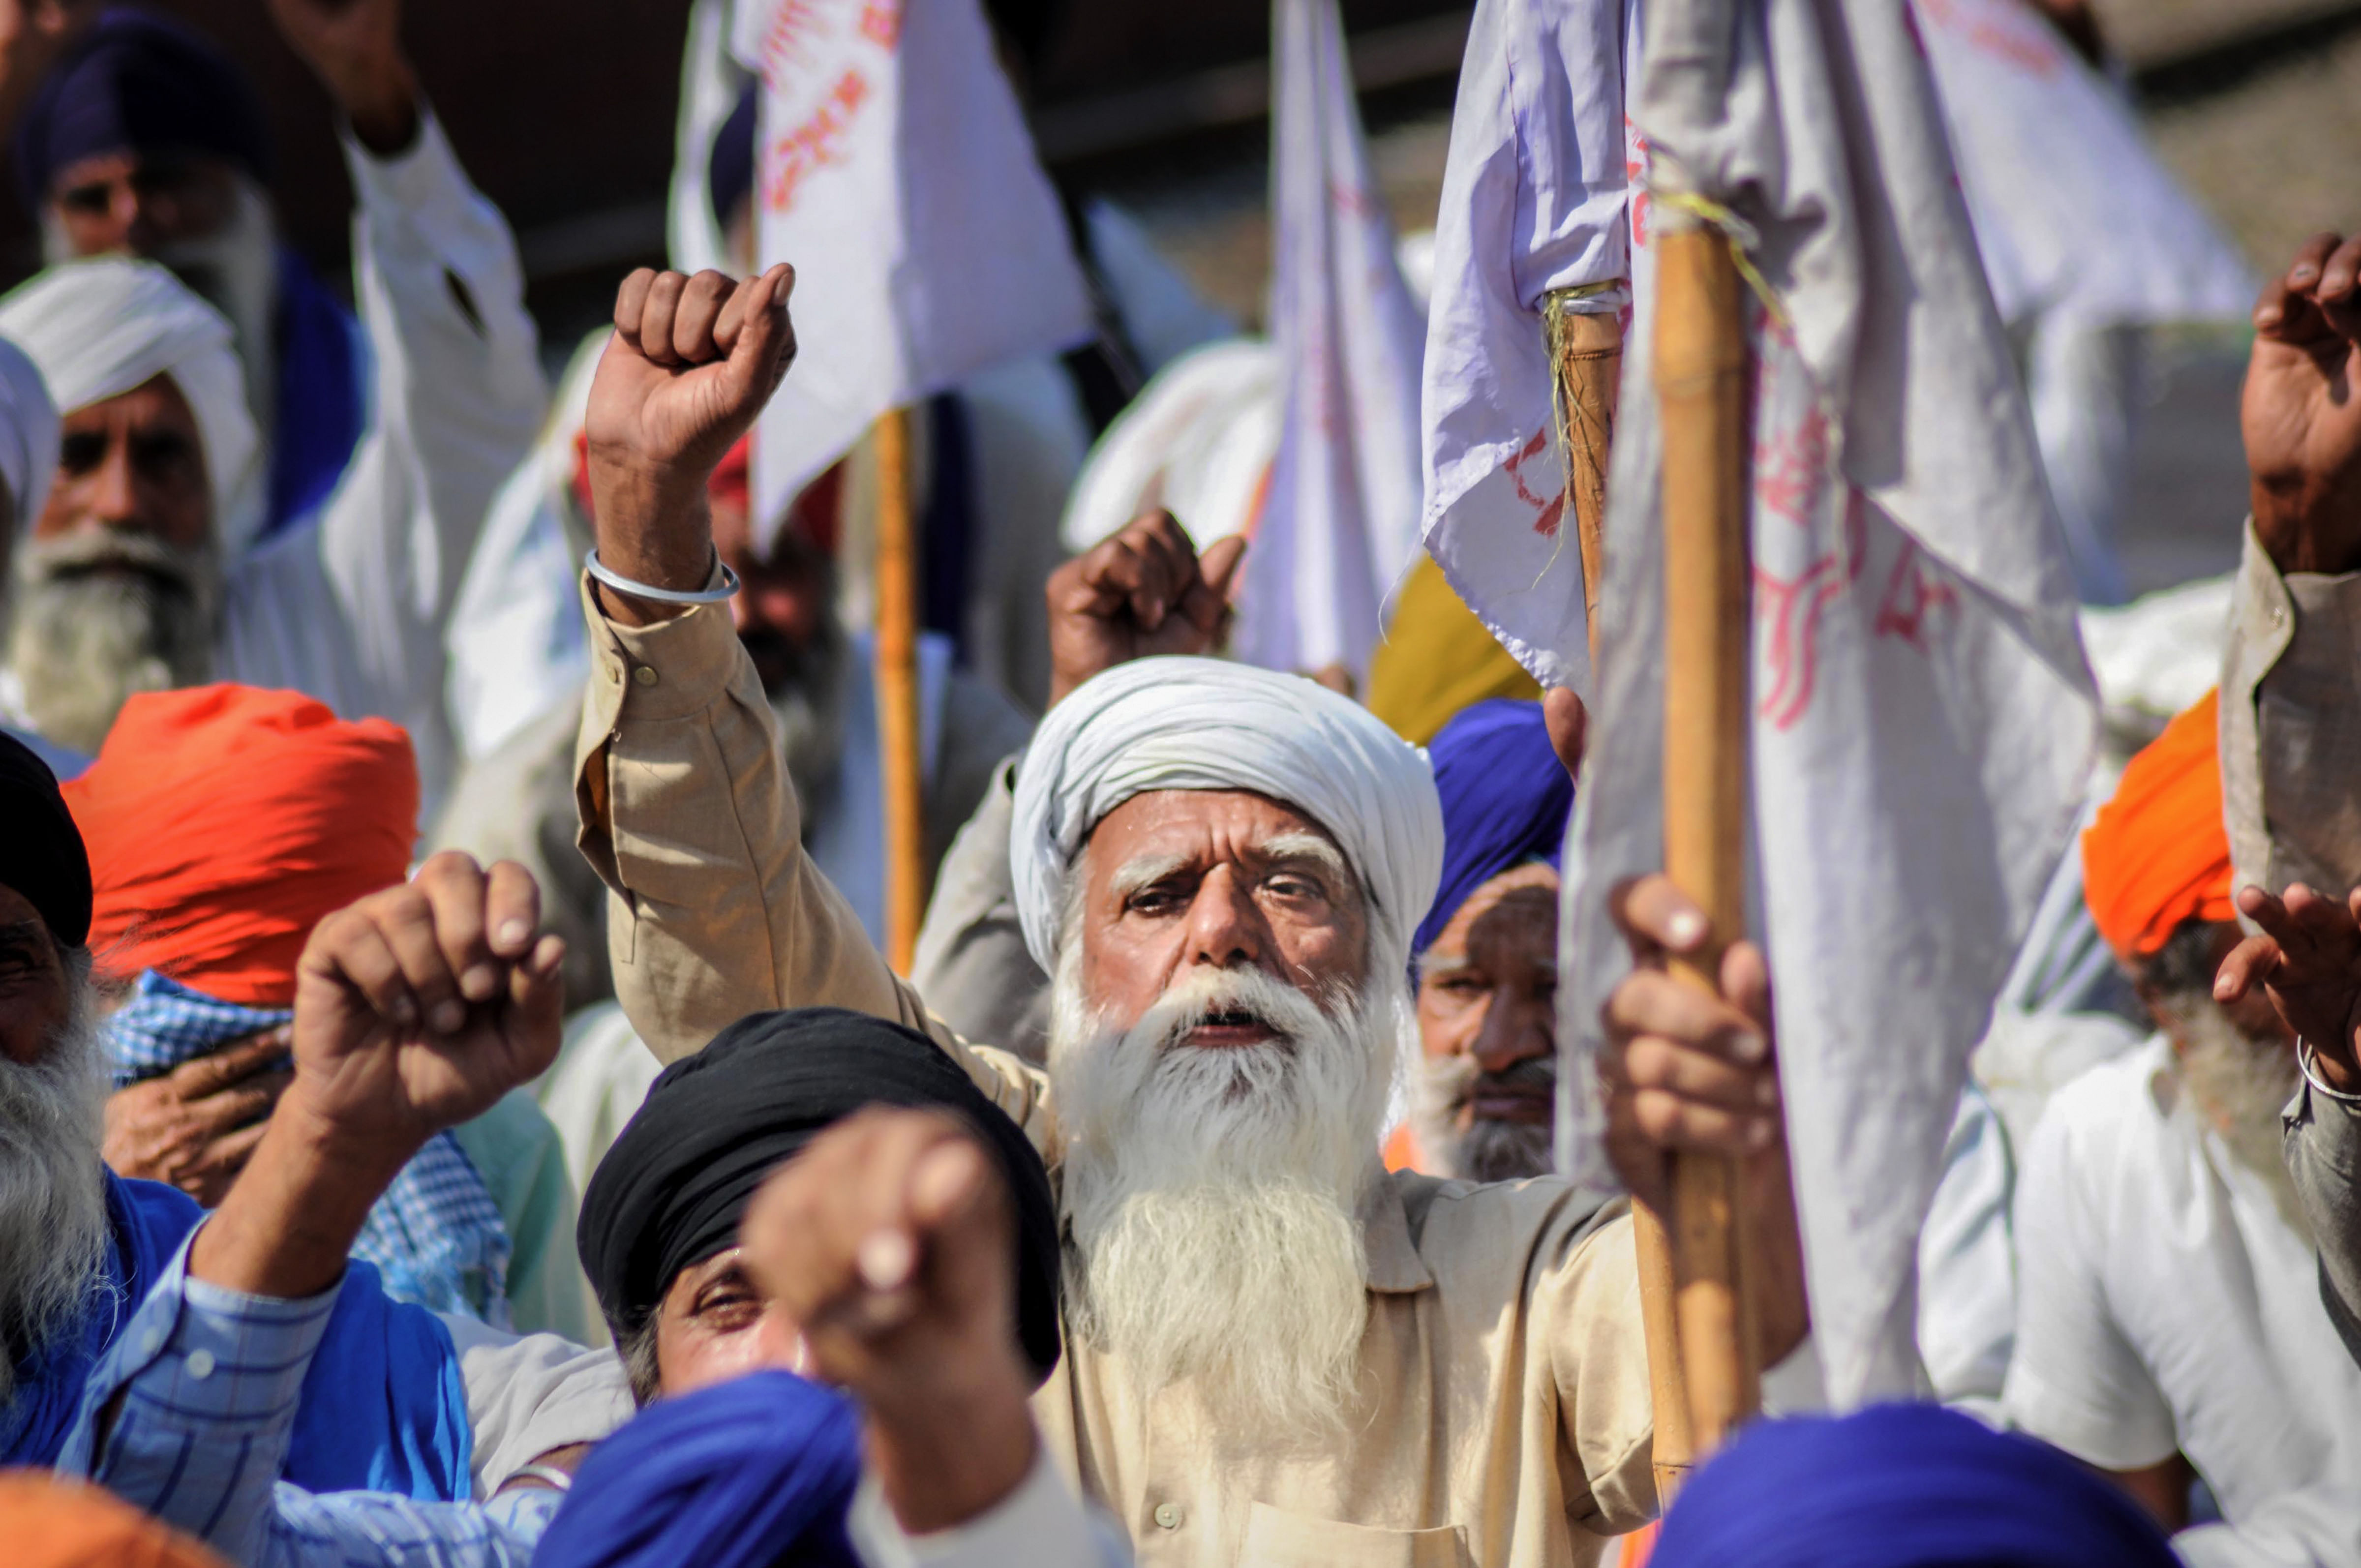 Farmers block railway tracks during a protest against the new farm bills, at Jandiala Guru in Amritsar, Tuesday, Oct. 27, 2020. Credit: PTI Photo